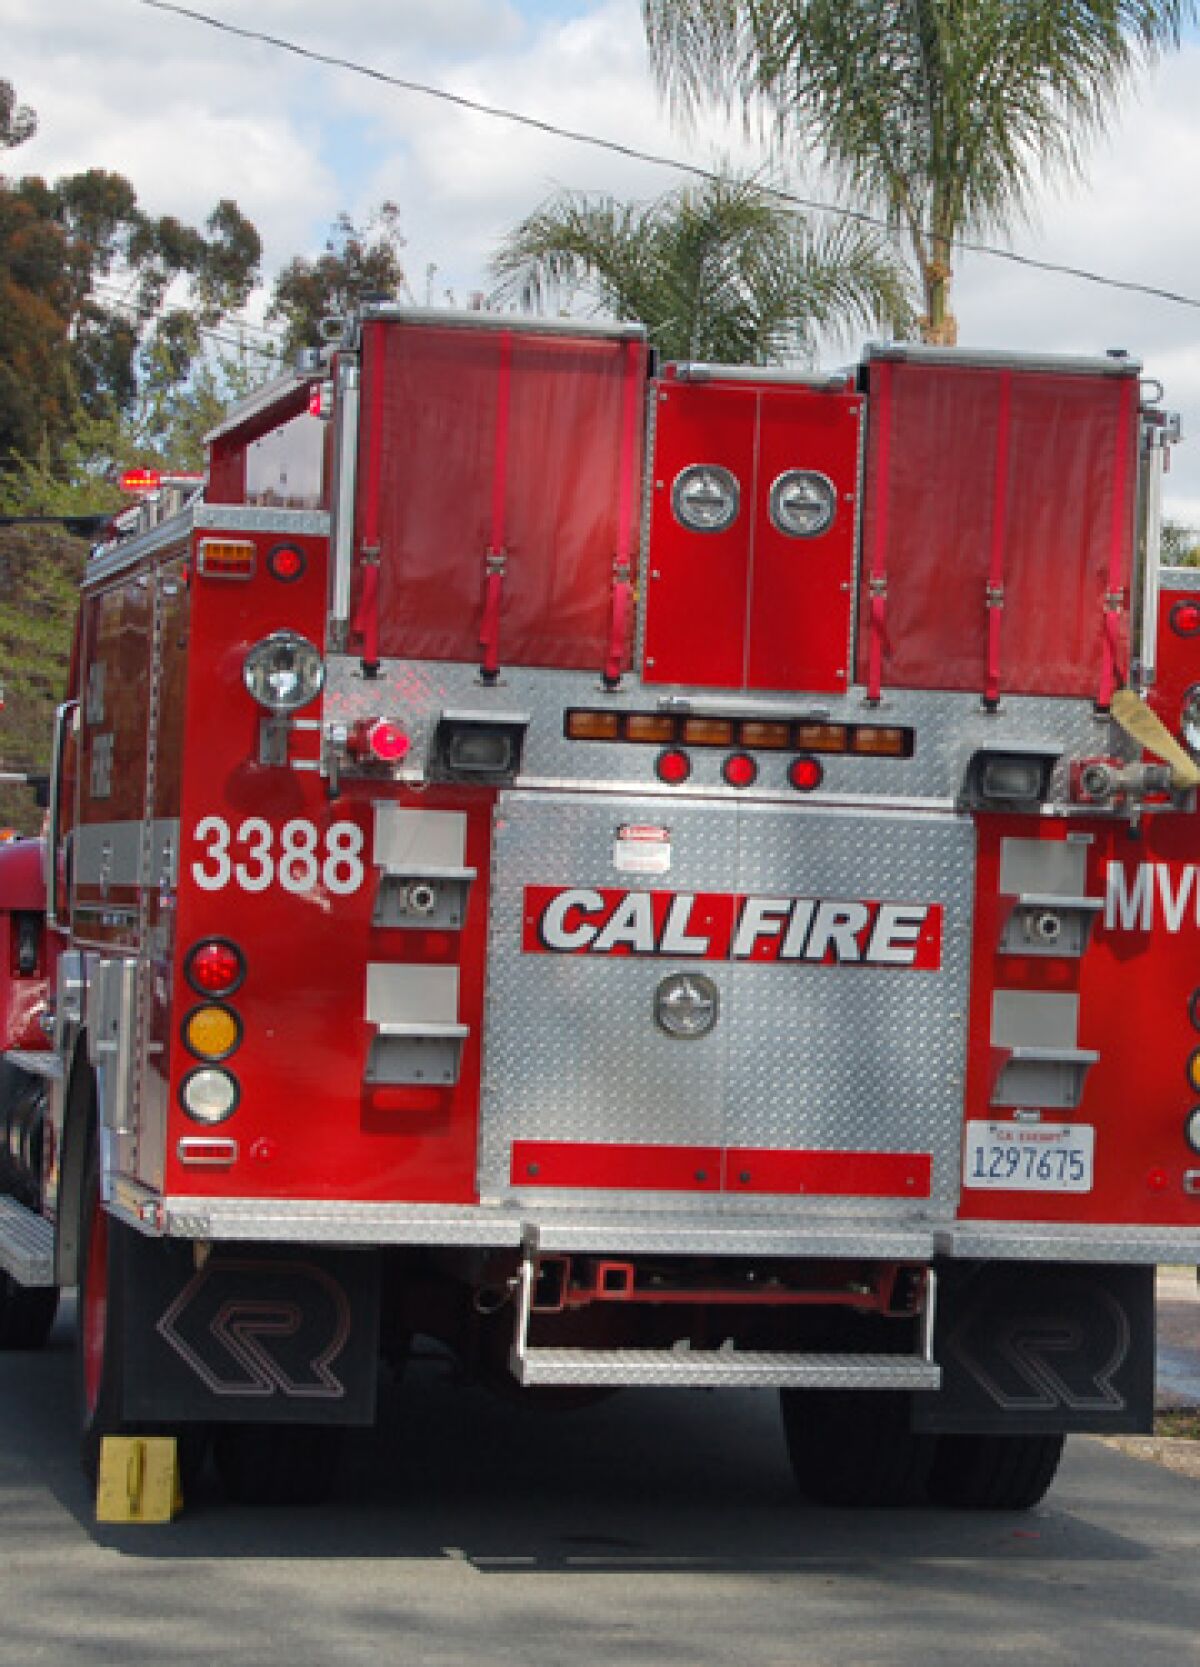 Cal Fire's redesigned website features a more user-friendly structure and updates during wildfires, officials said.